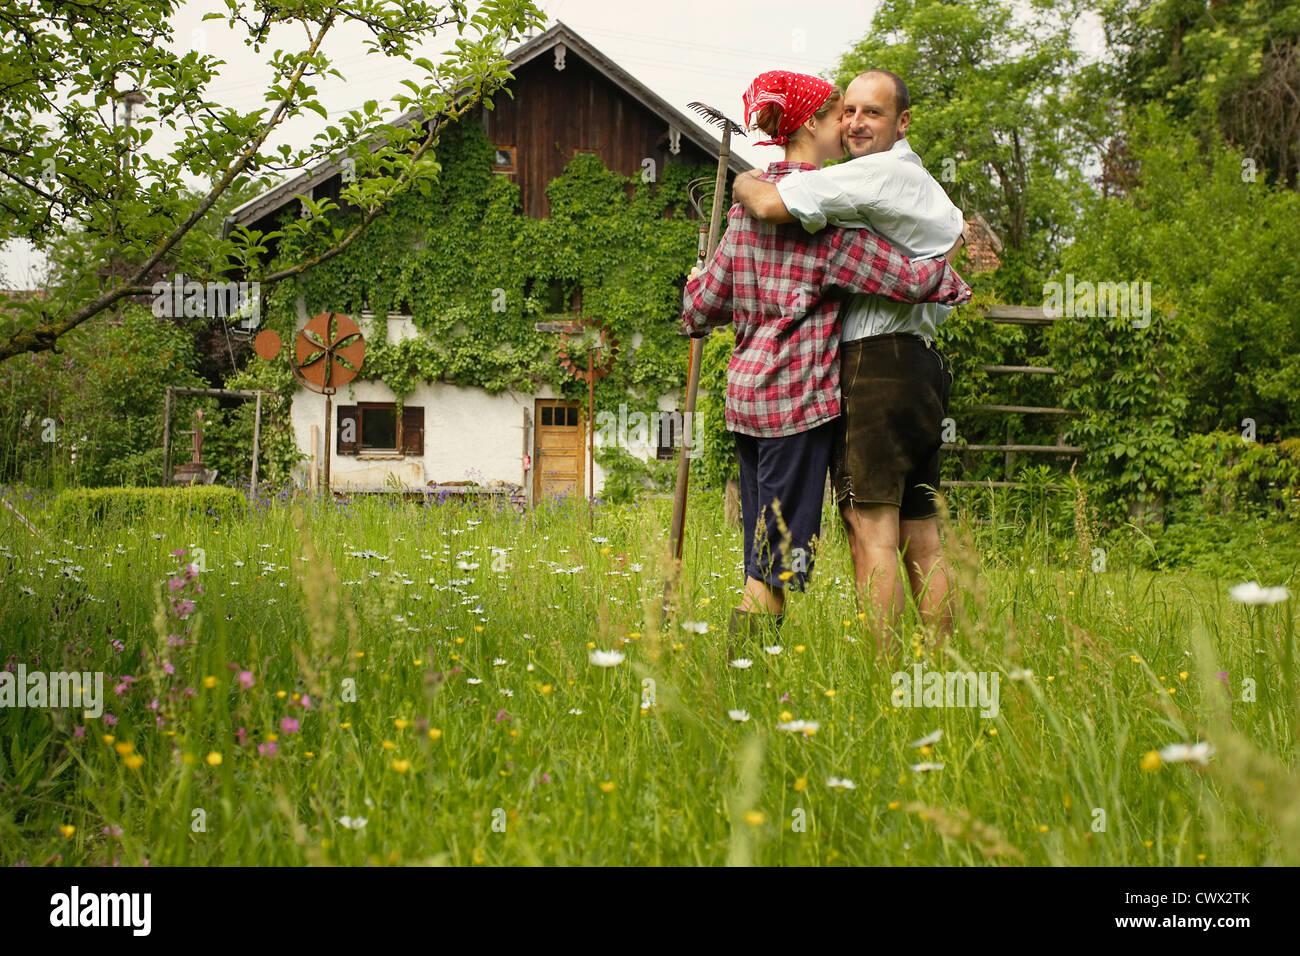 Couple hugging in backyard Banque D'Images